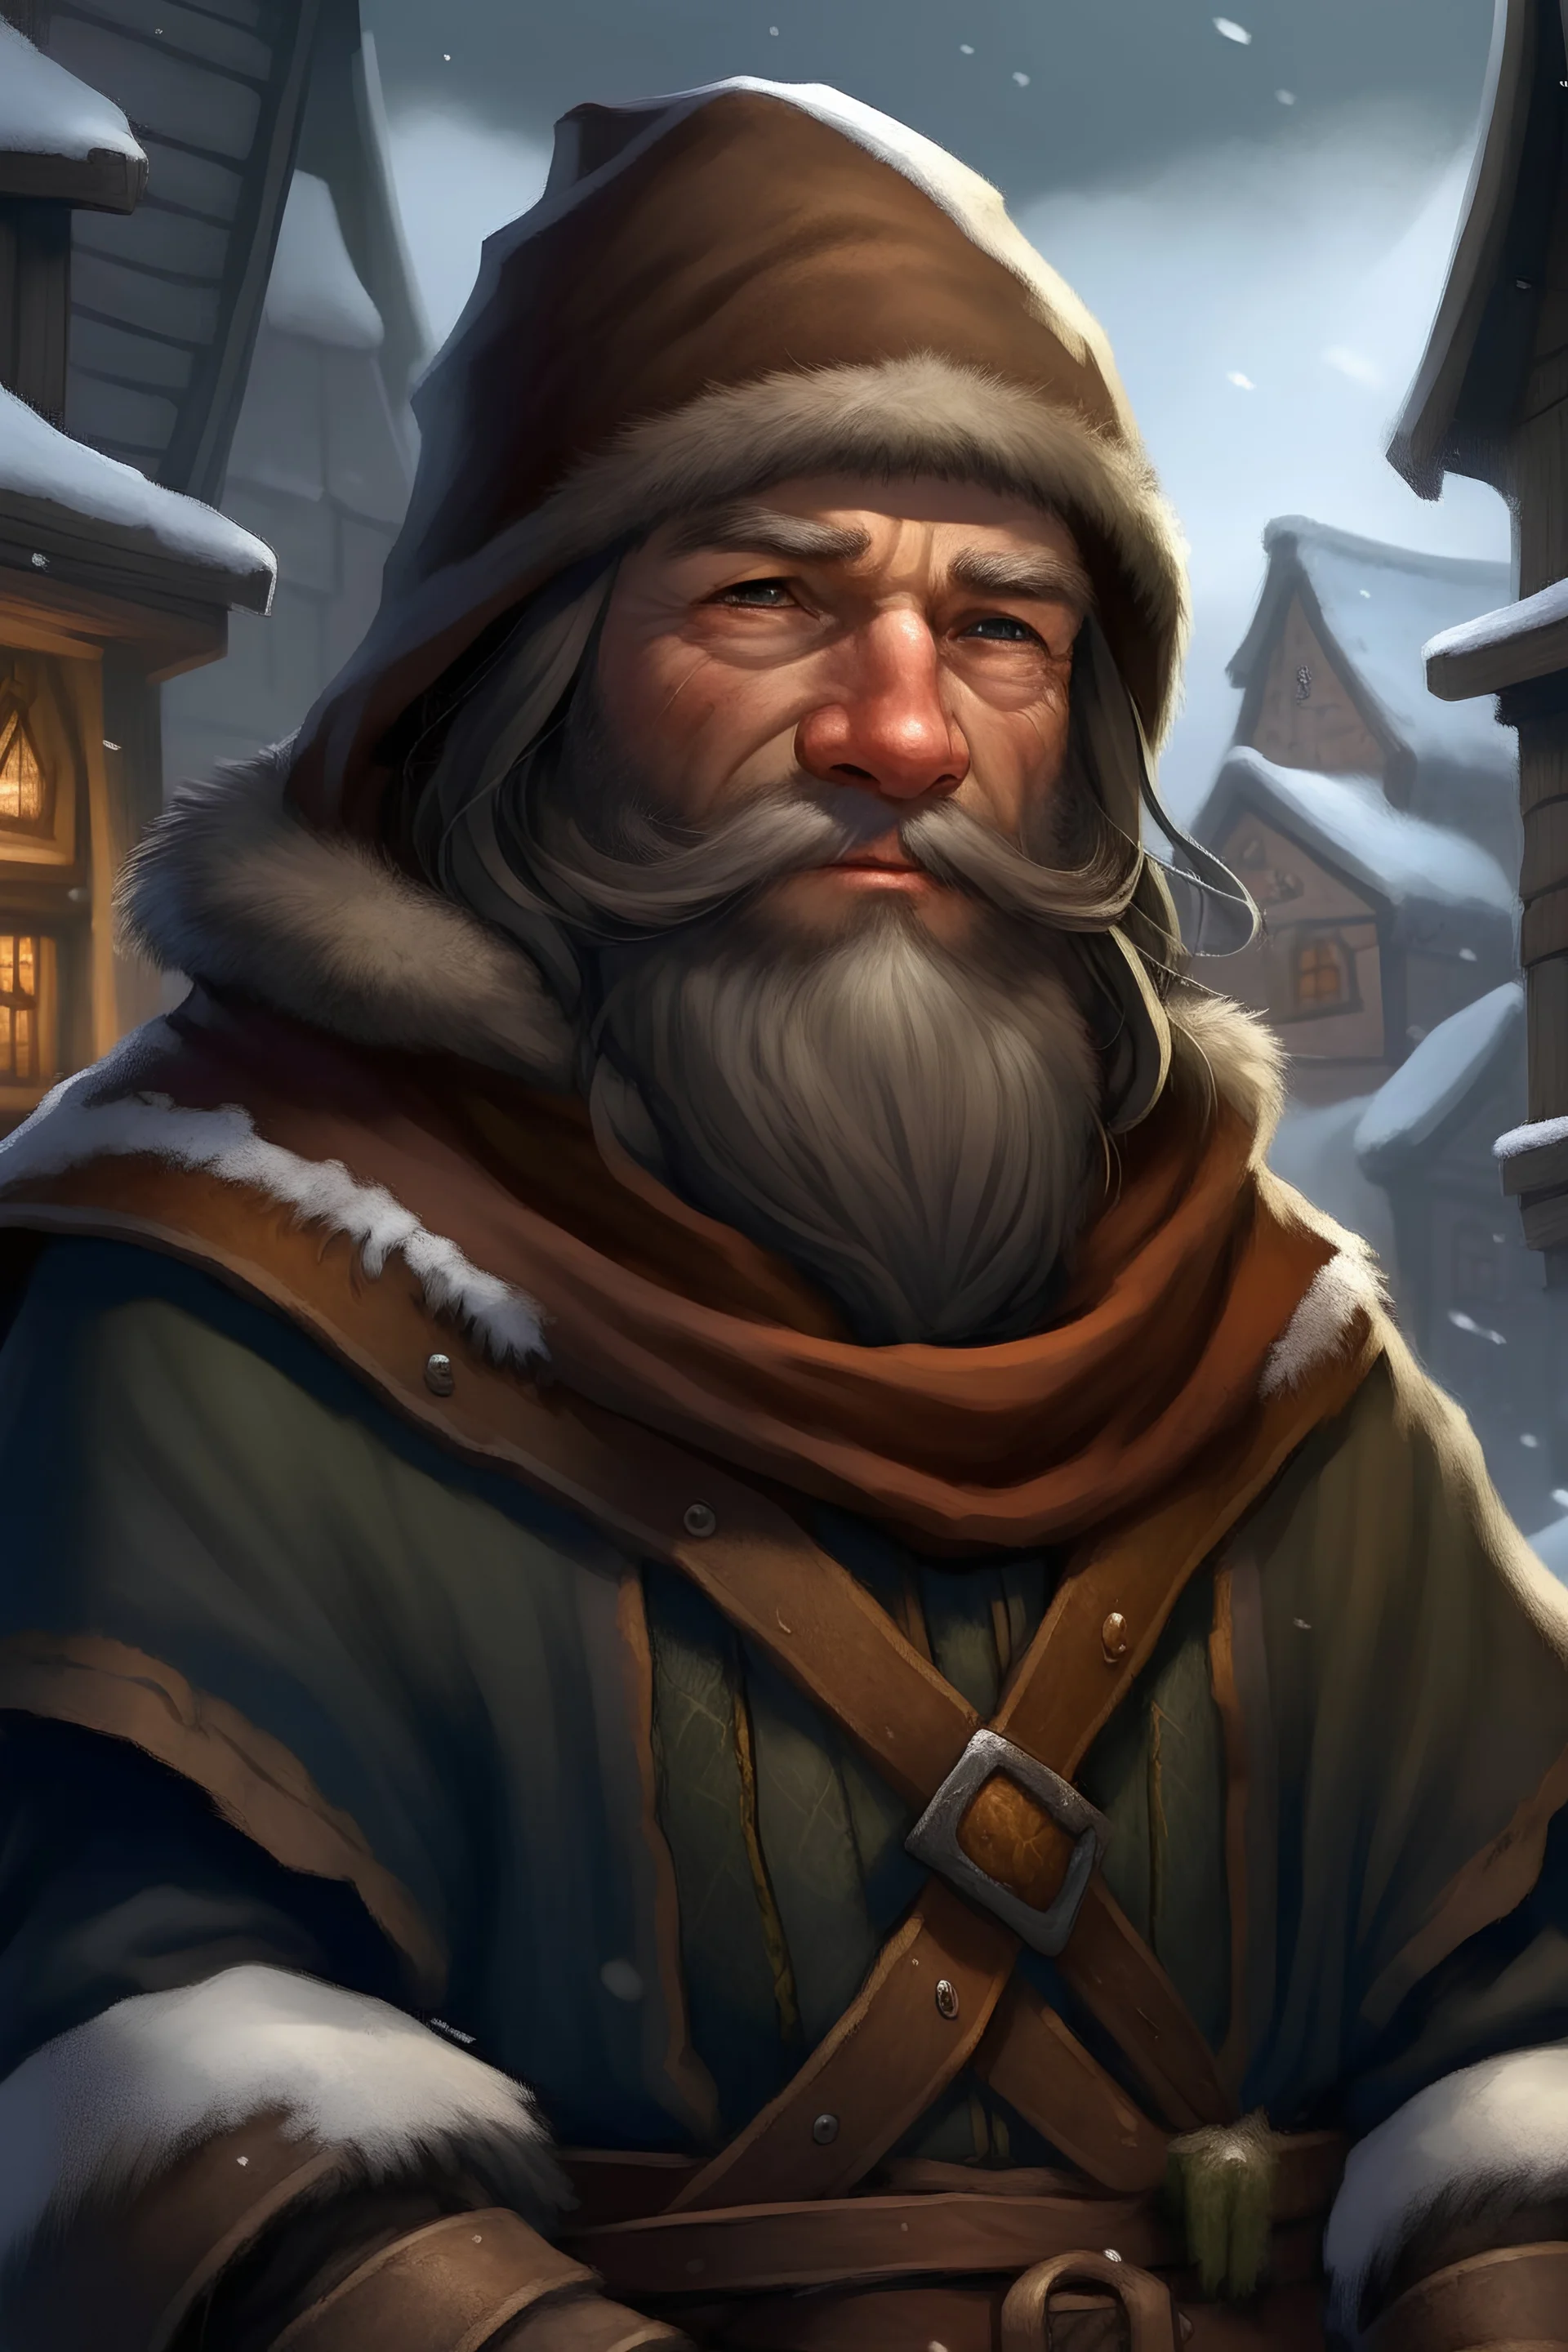 dnd, fantasy, high resolution, in a snowy northern town, portrait, dwarf male trader, medieval times